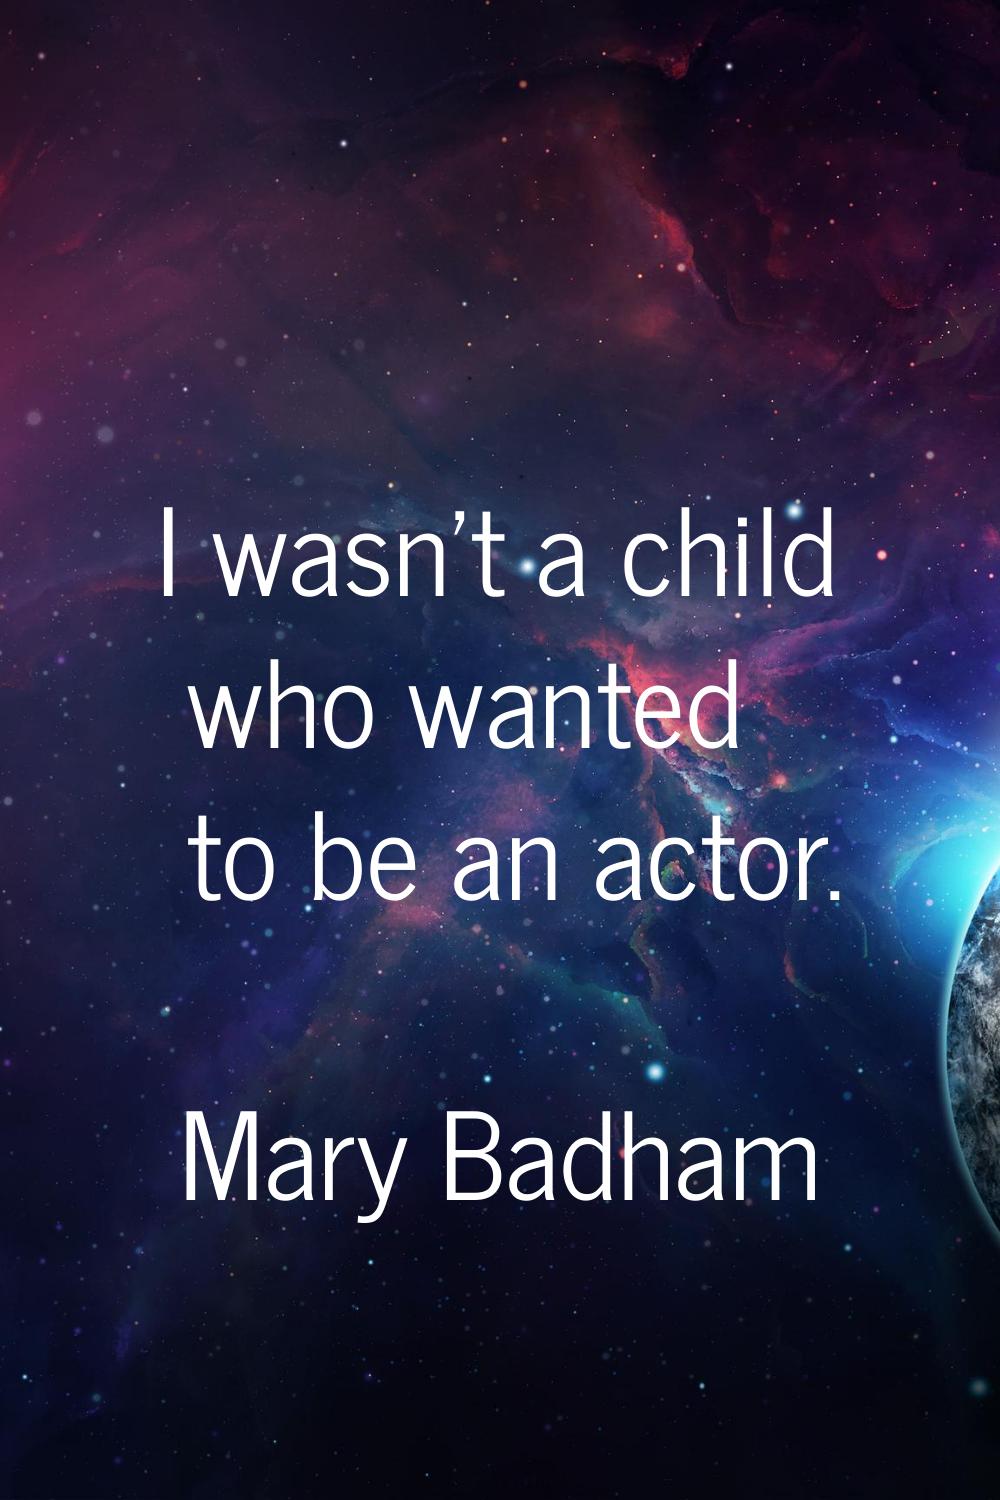 I wasn't a child who wanted to be an actor.